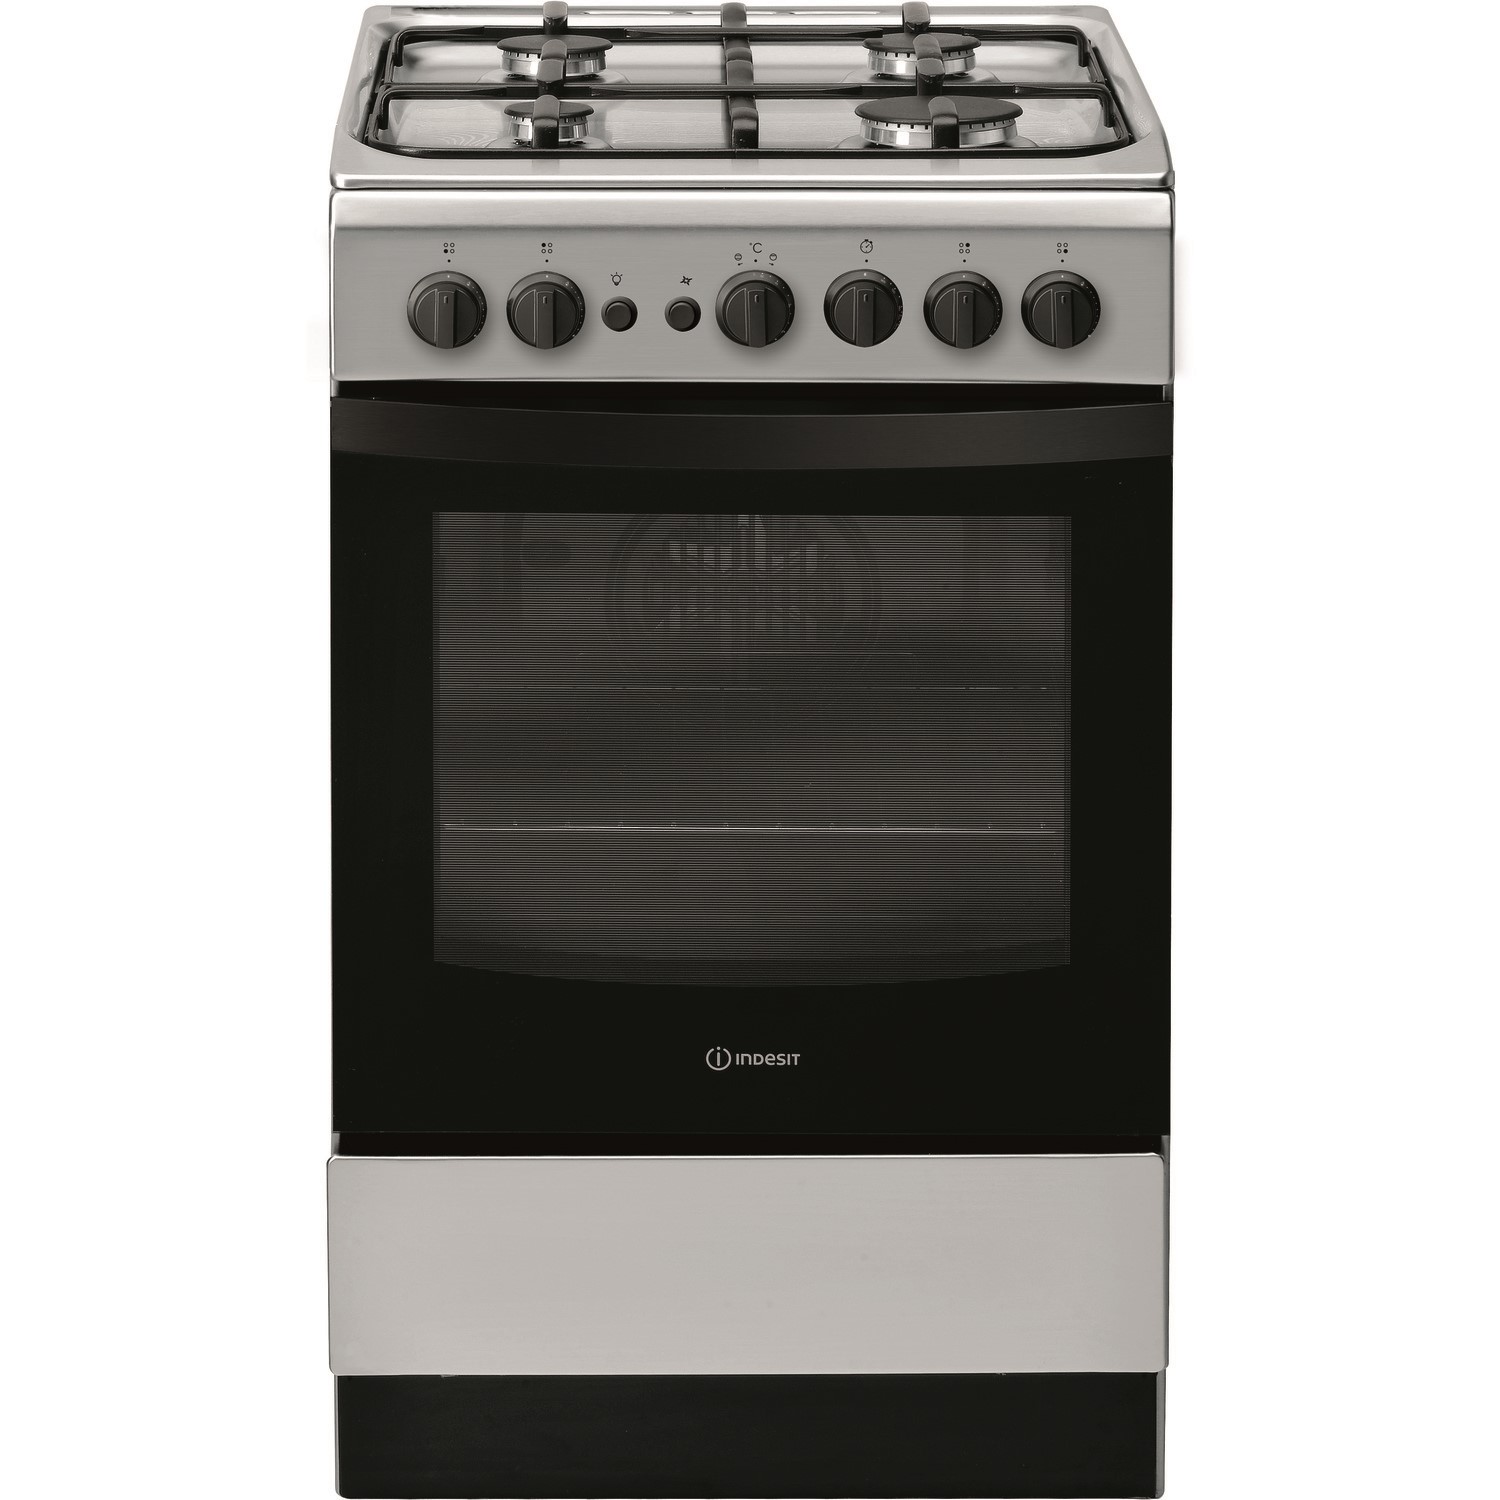 Indesit Cloe IS5G1PMSS Gas Cooker, Silver